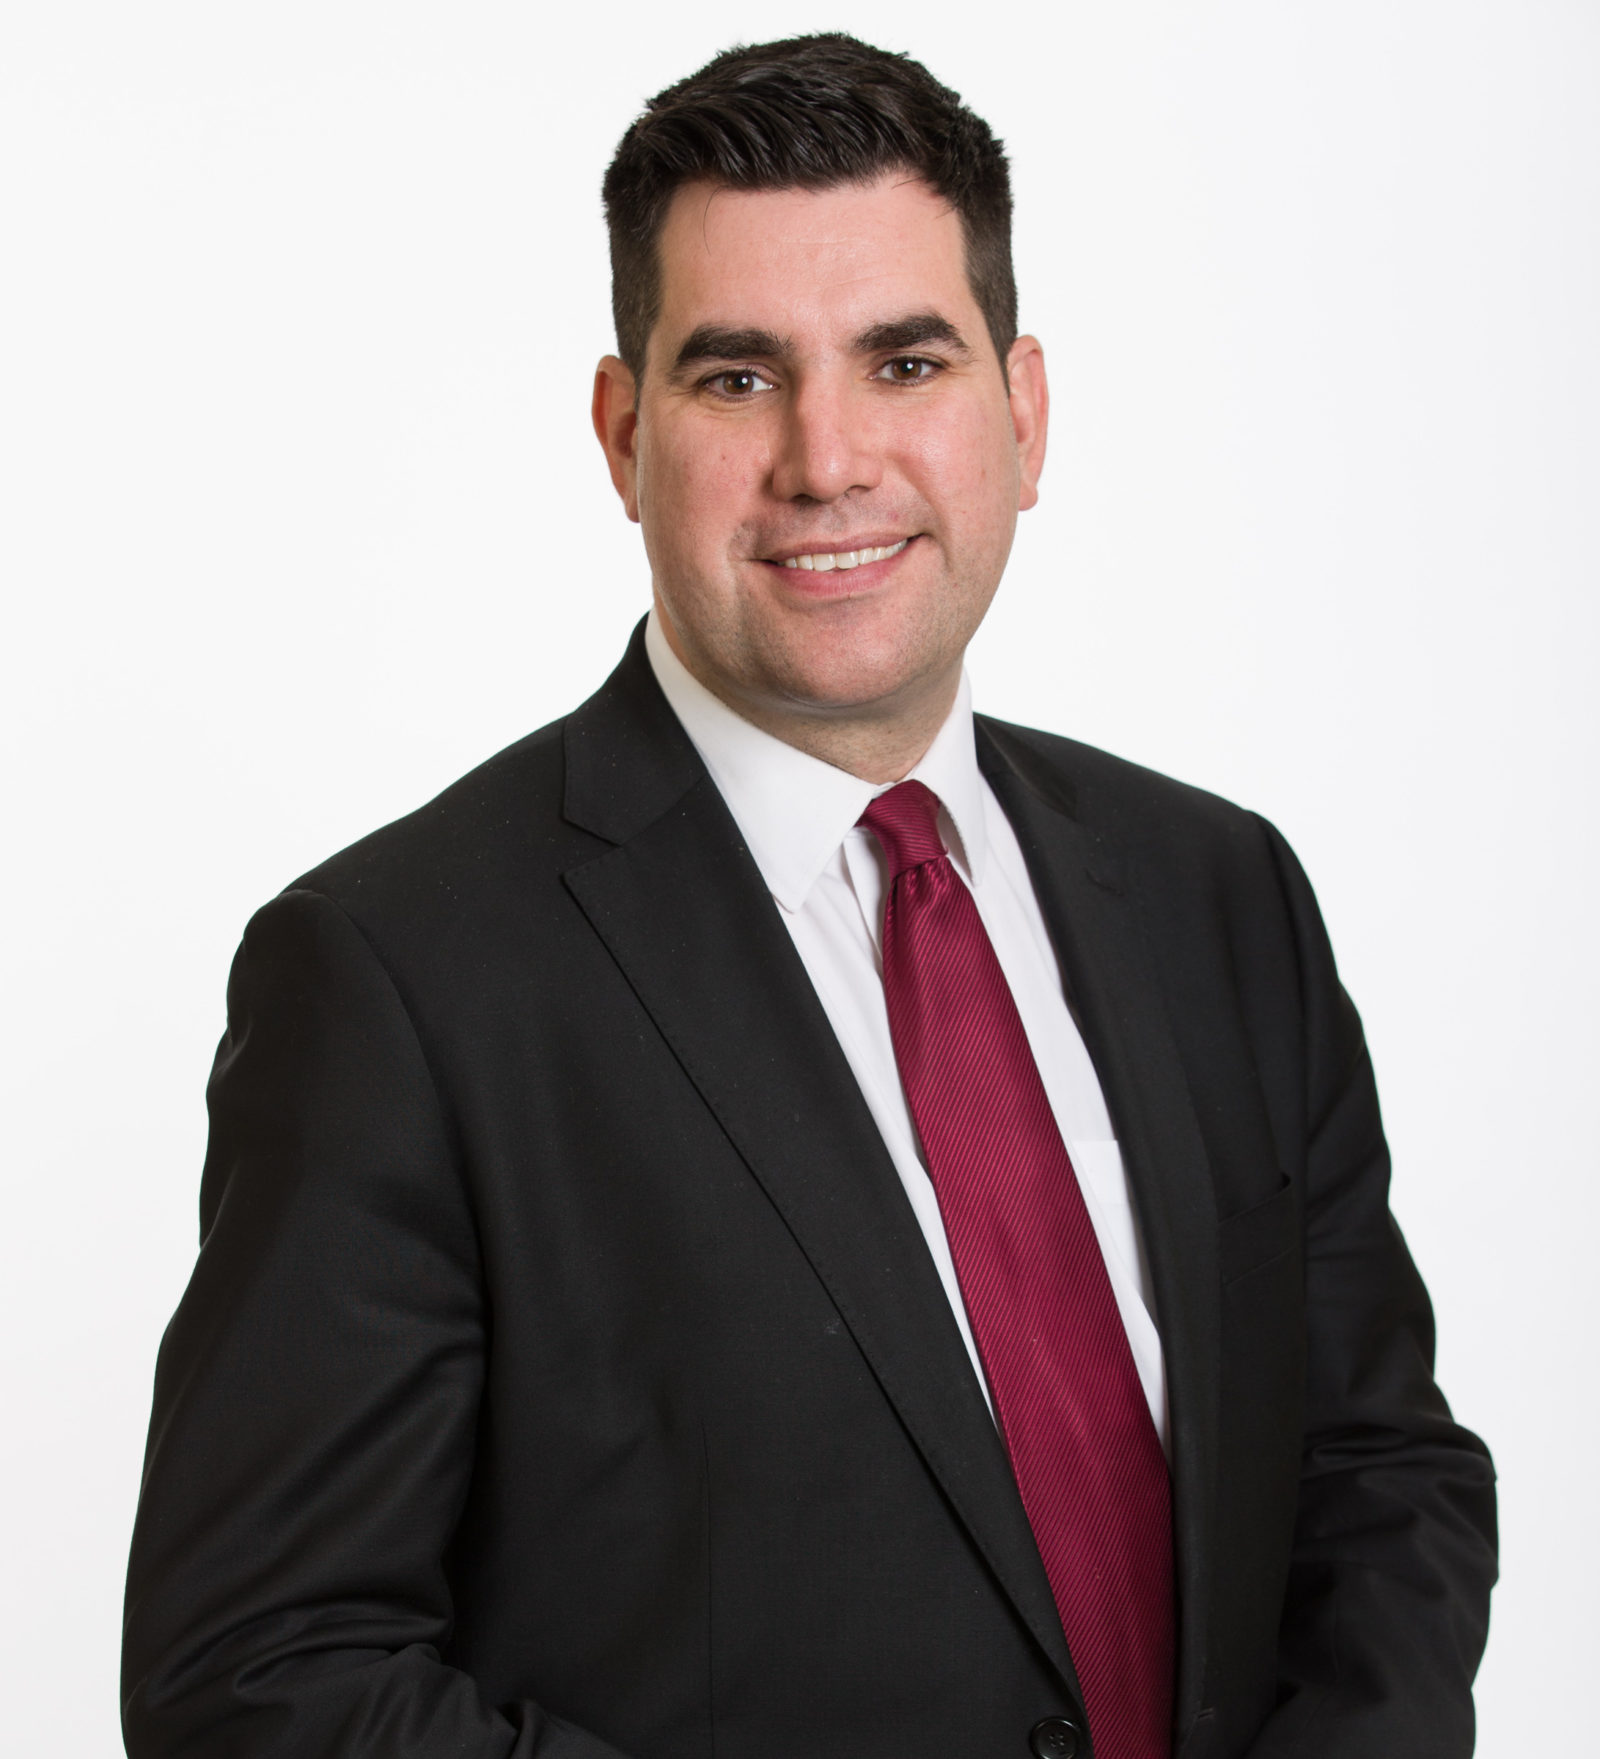 Richard Burgon, this photo is licensed under a Creative Commons Attribution 4.0 License, meaning it can be used freely with attribution.